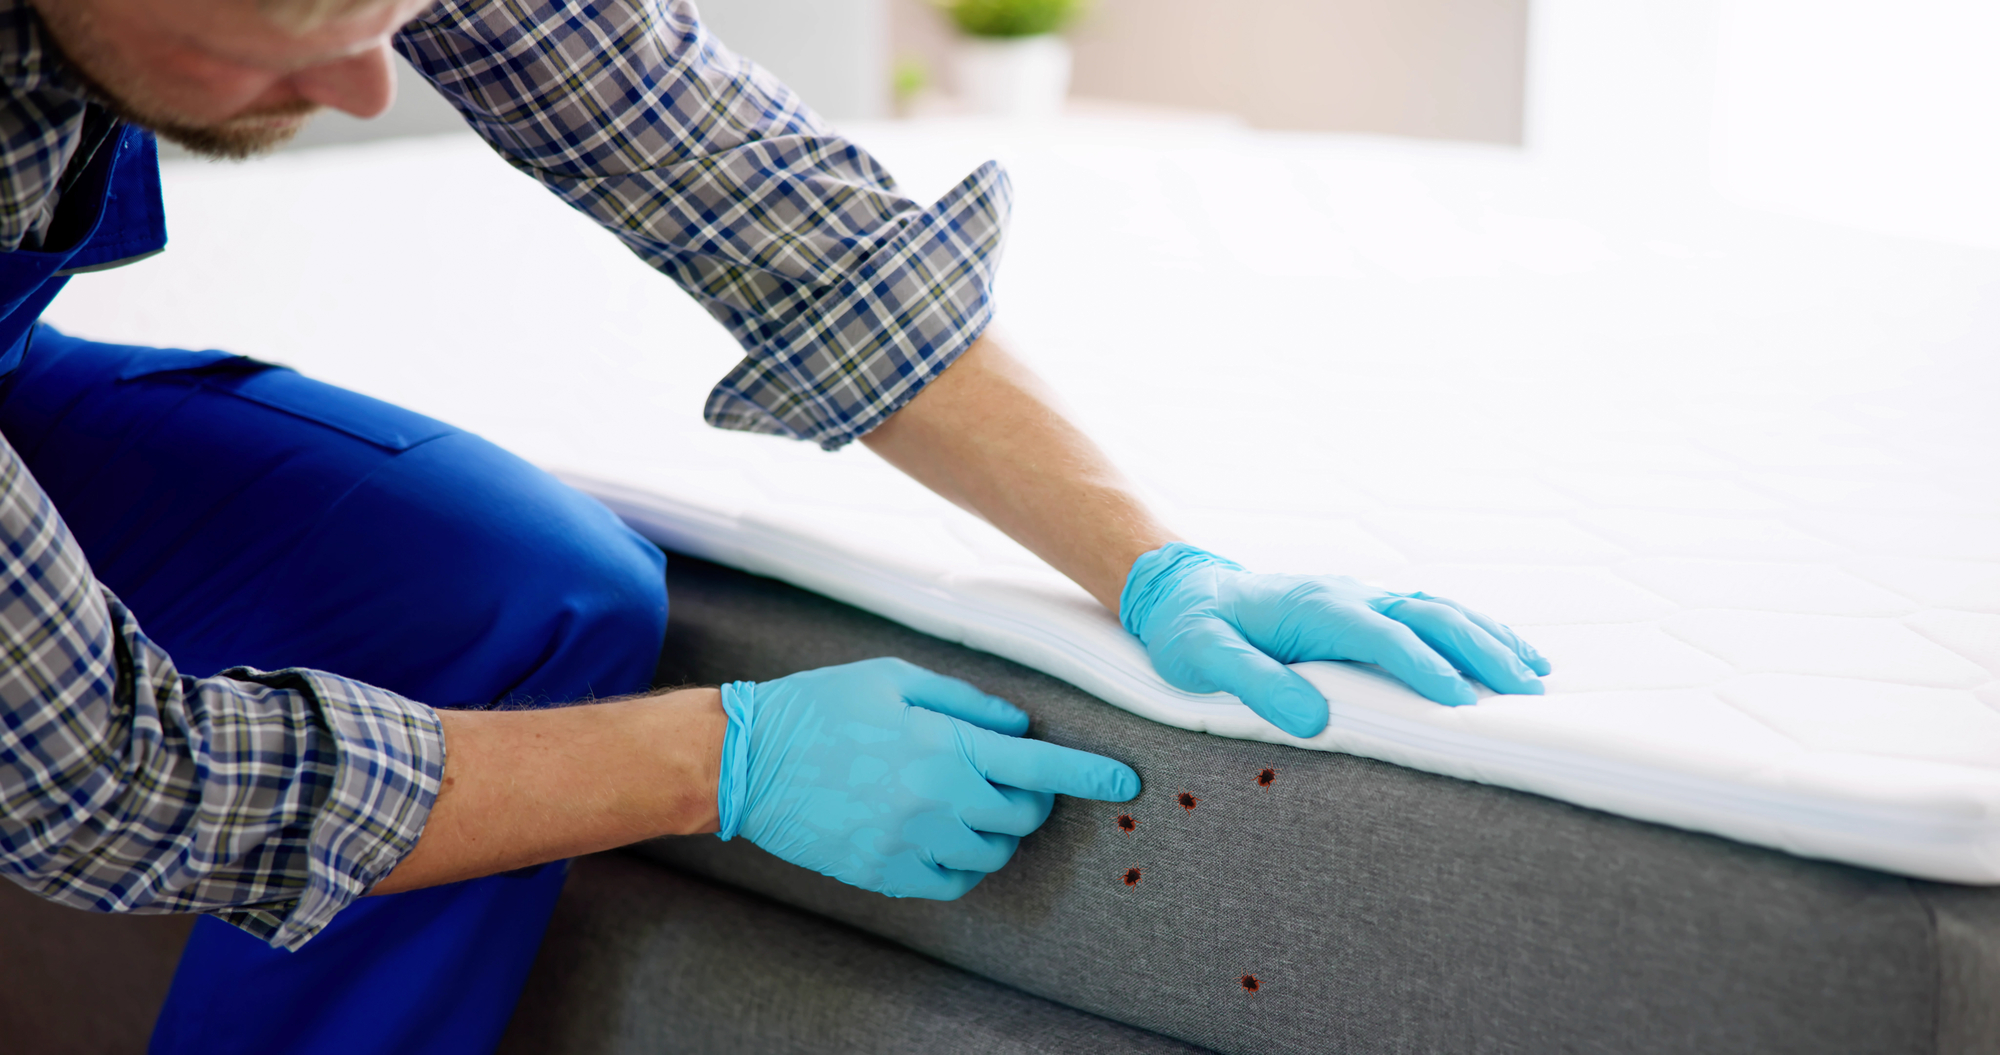 Bed Bug Infestation And Treatment Service in San Francisco. Bugs Extermination